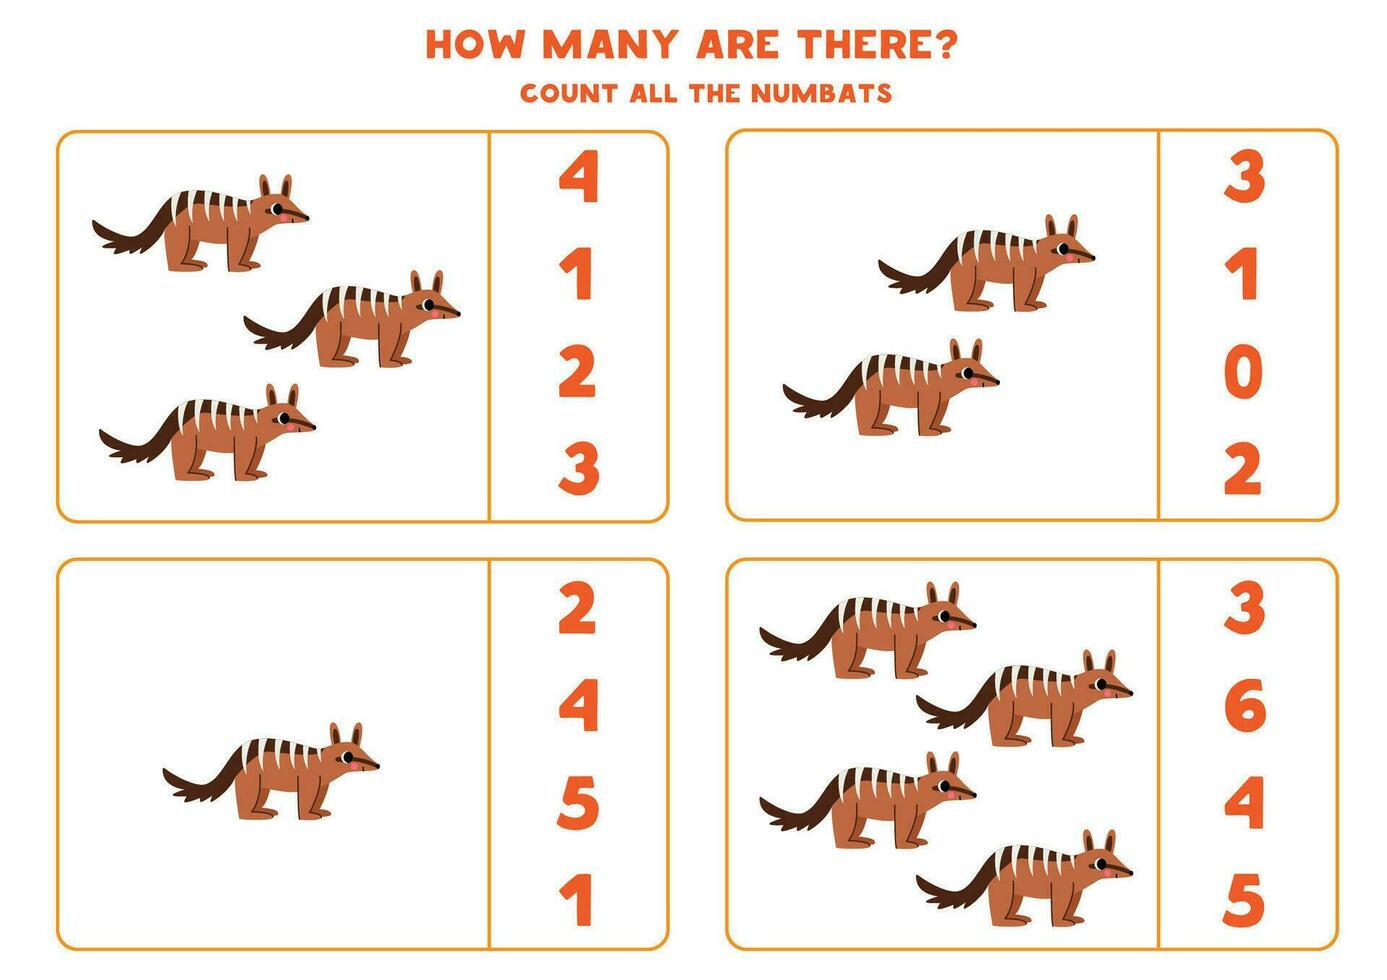 Count all cute cartoon brown numbats and circle the correct answers. vector